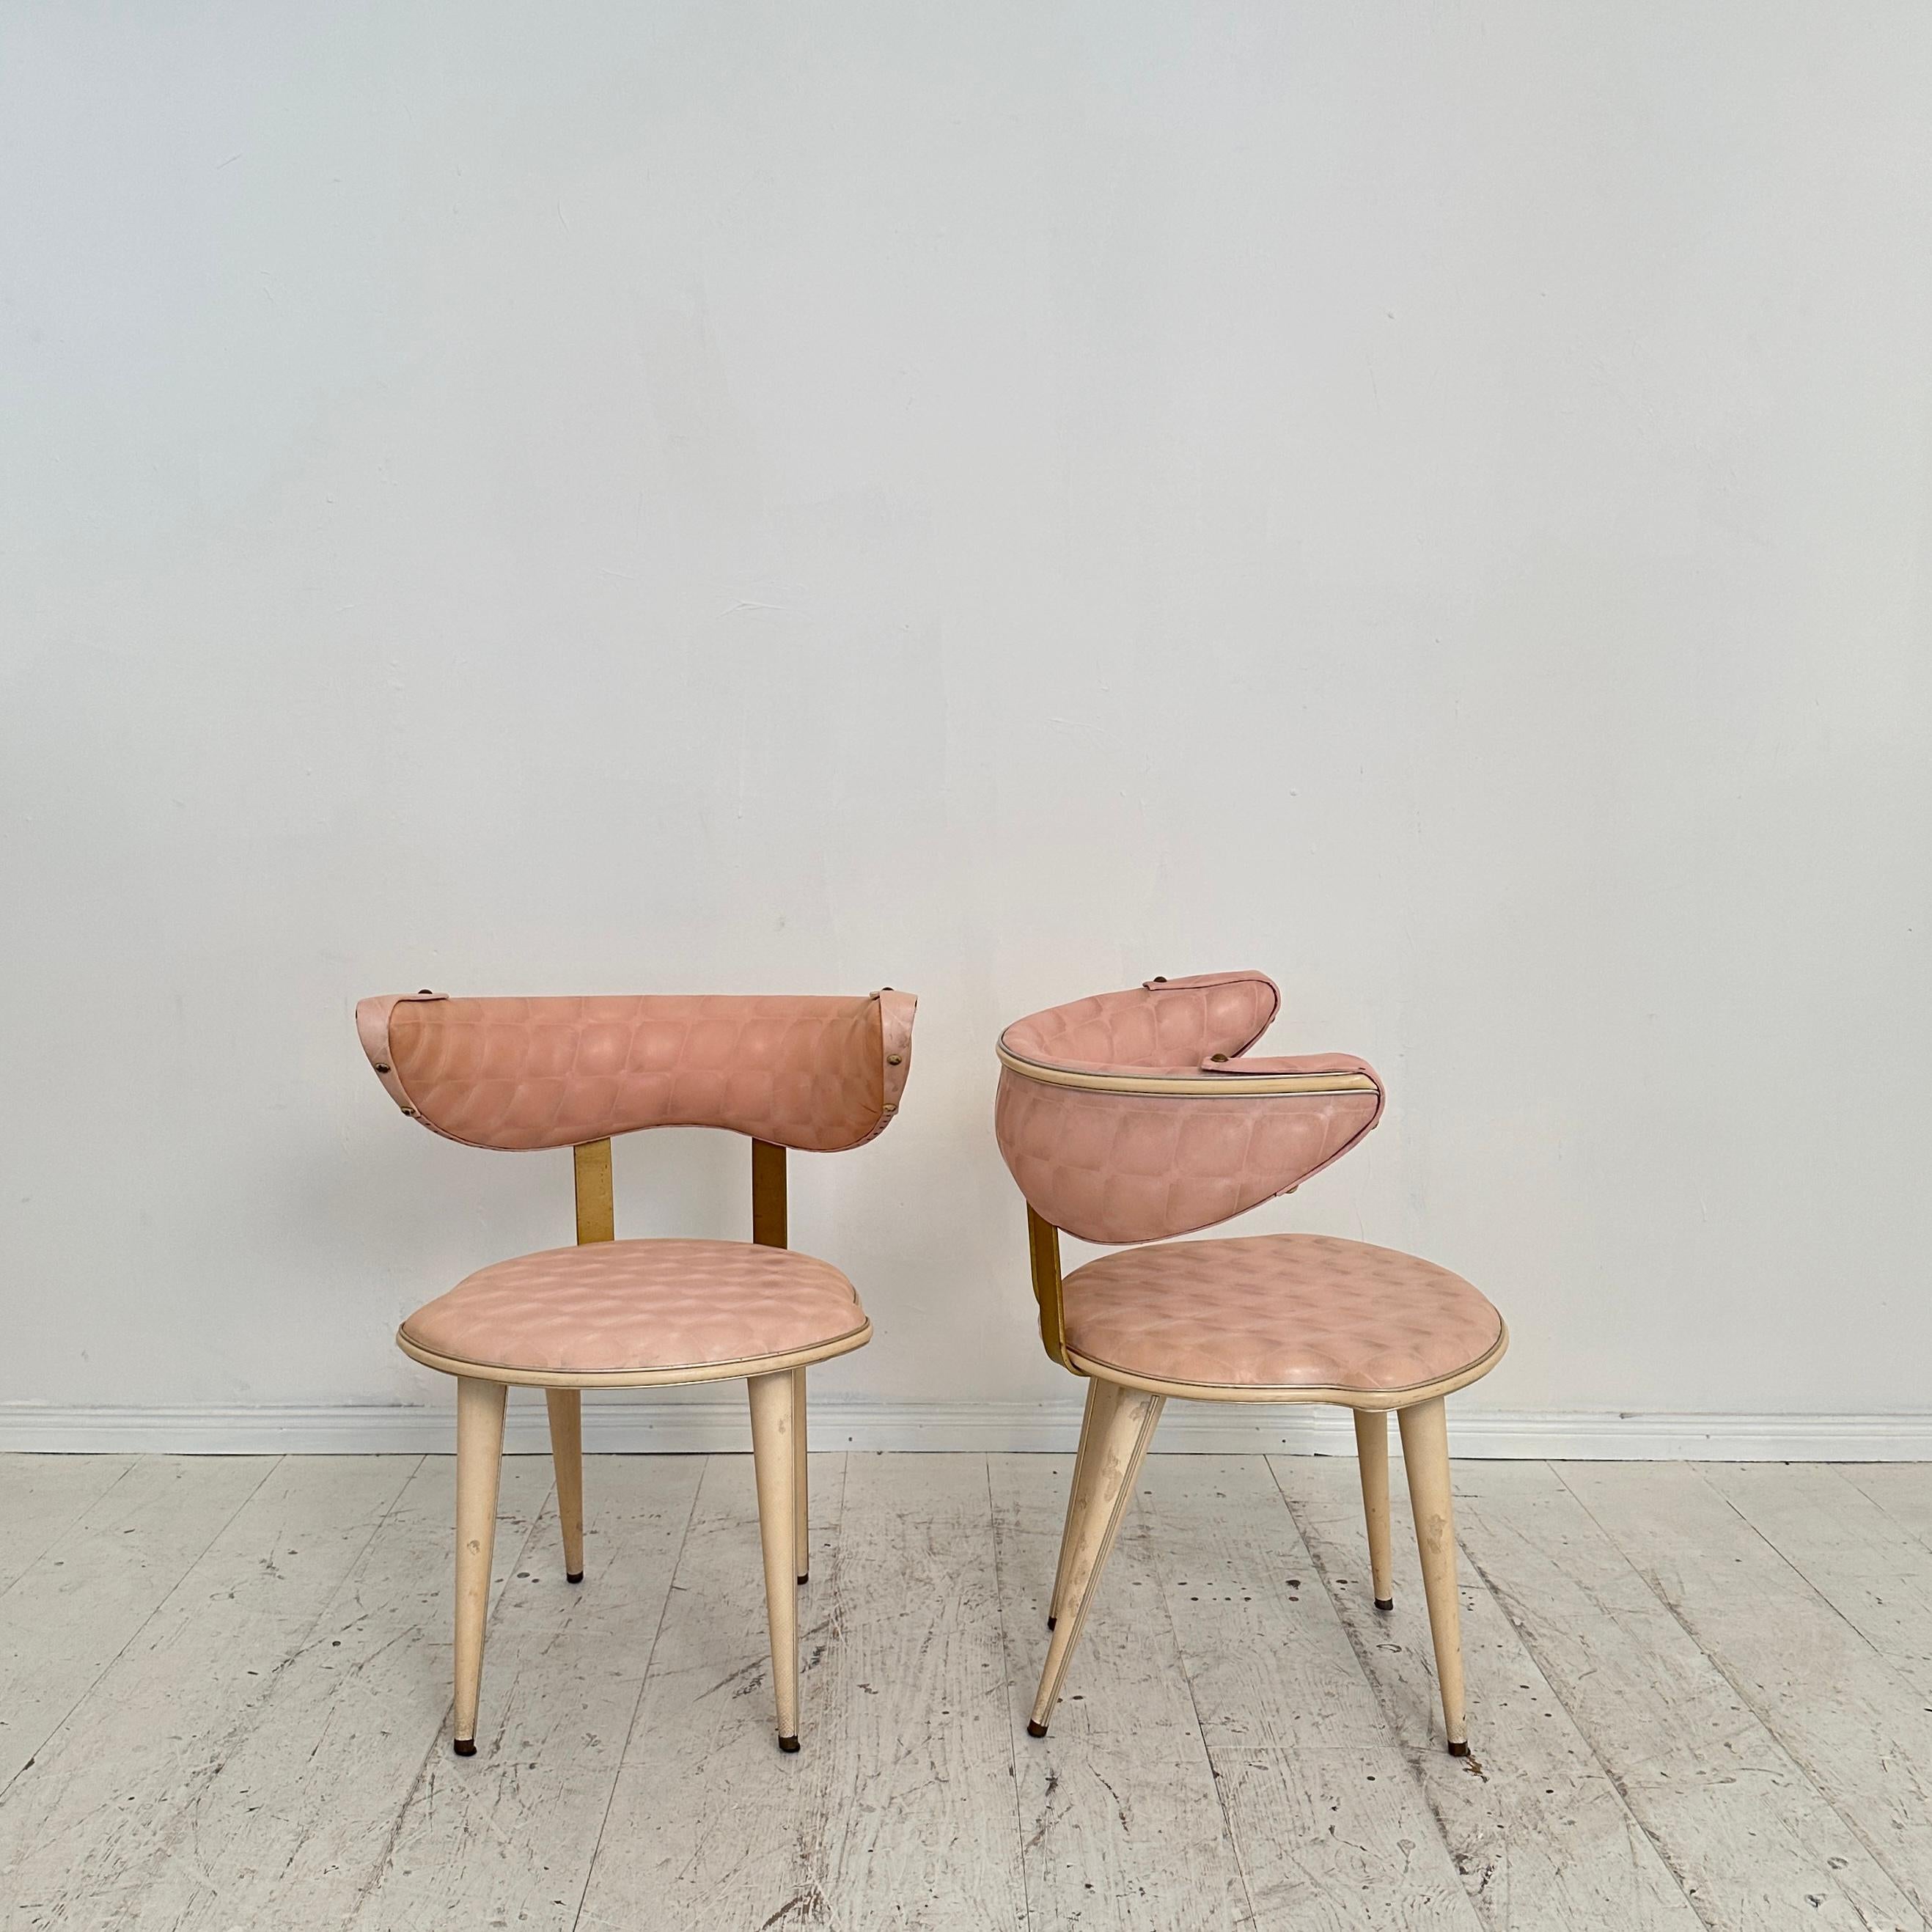 Faux Leather Pair of Mid Century Armchairs by Umberto Mascagni, light pink and white, 1954 For Sale